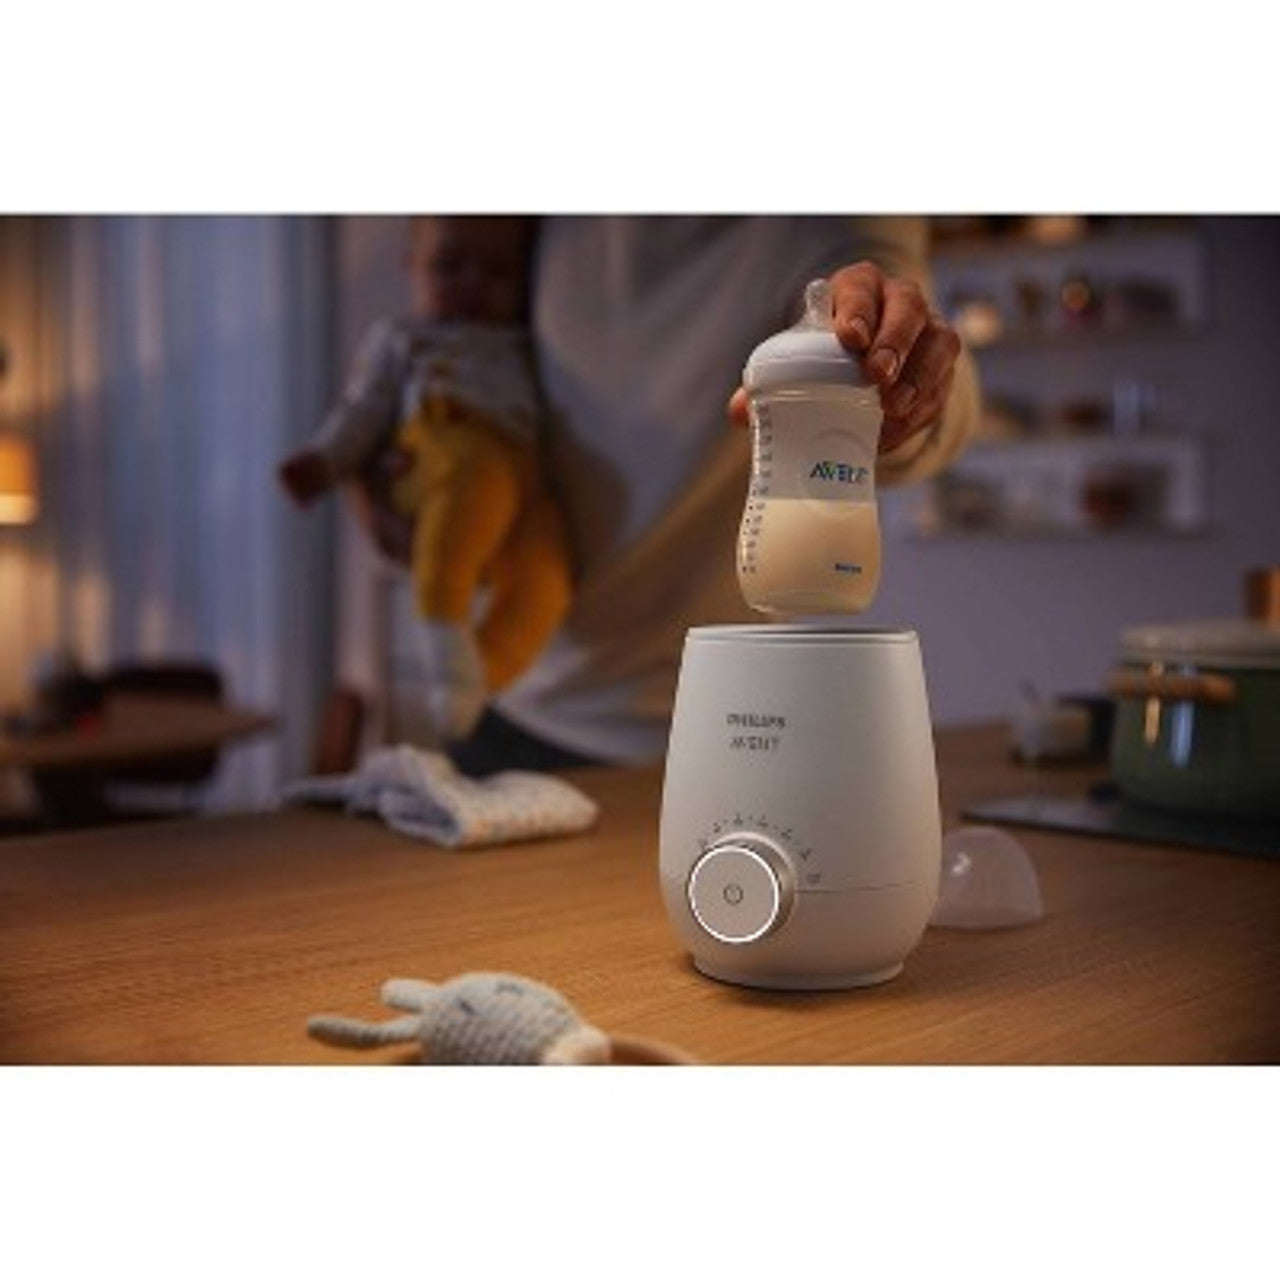 New Philips Avent Fast Baby Bottle Warmer with Auto Shut Off